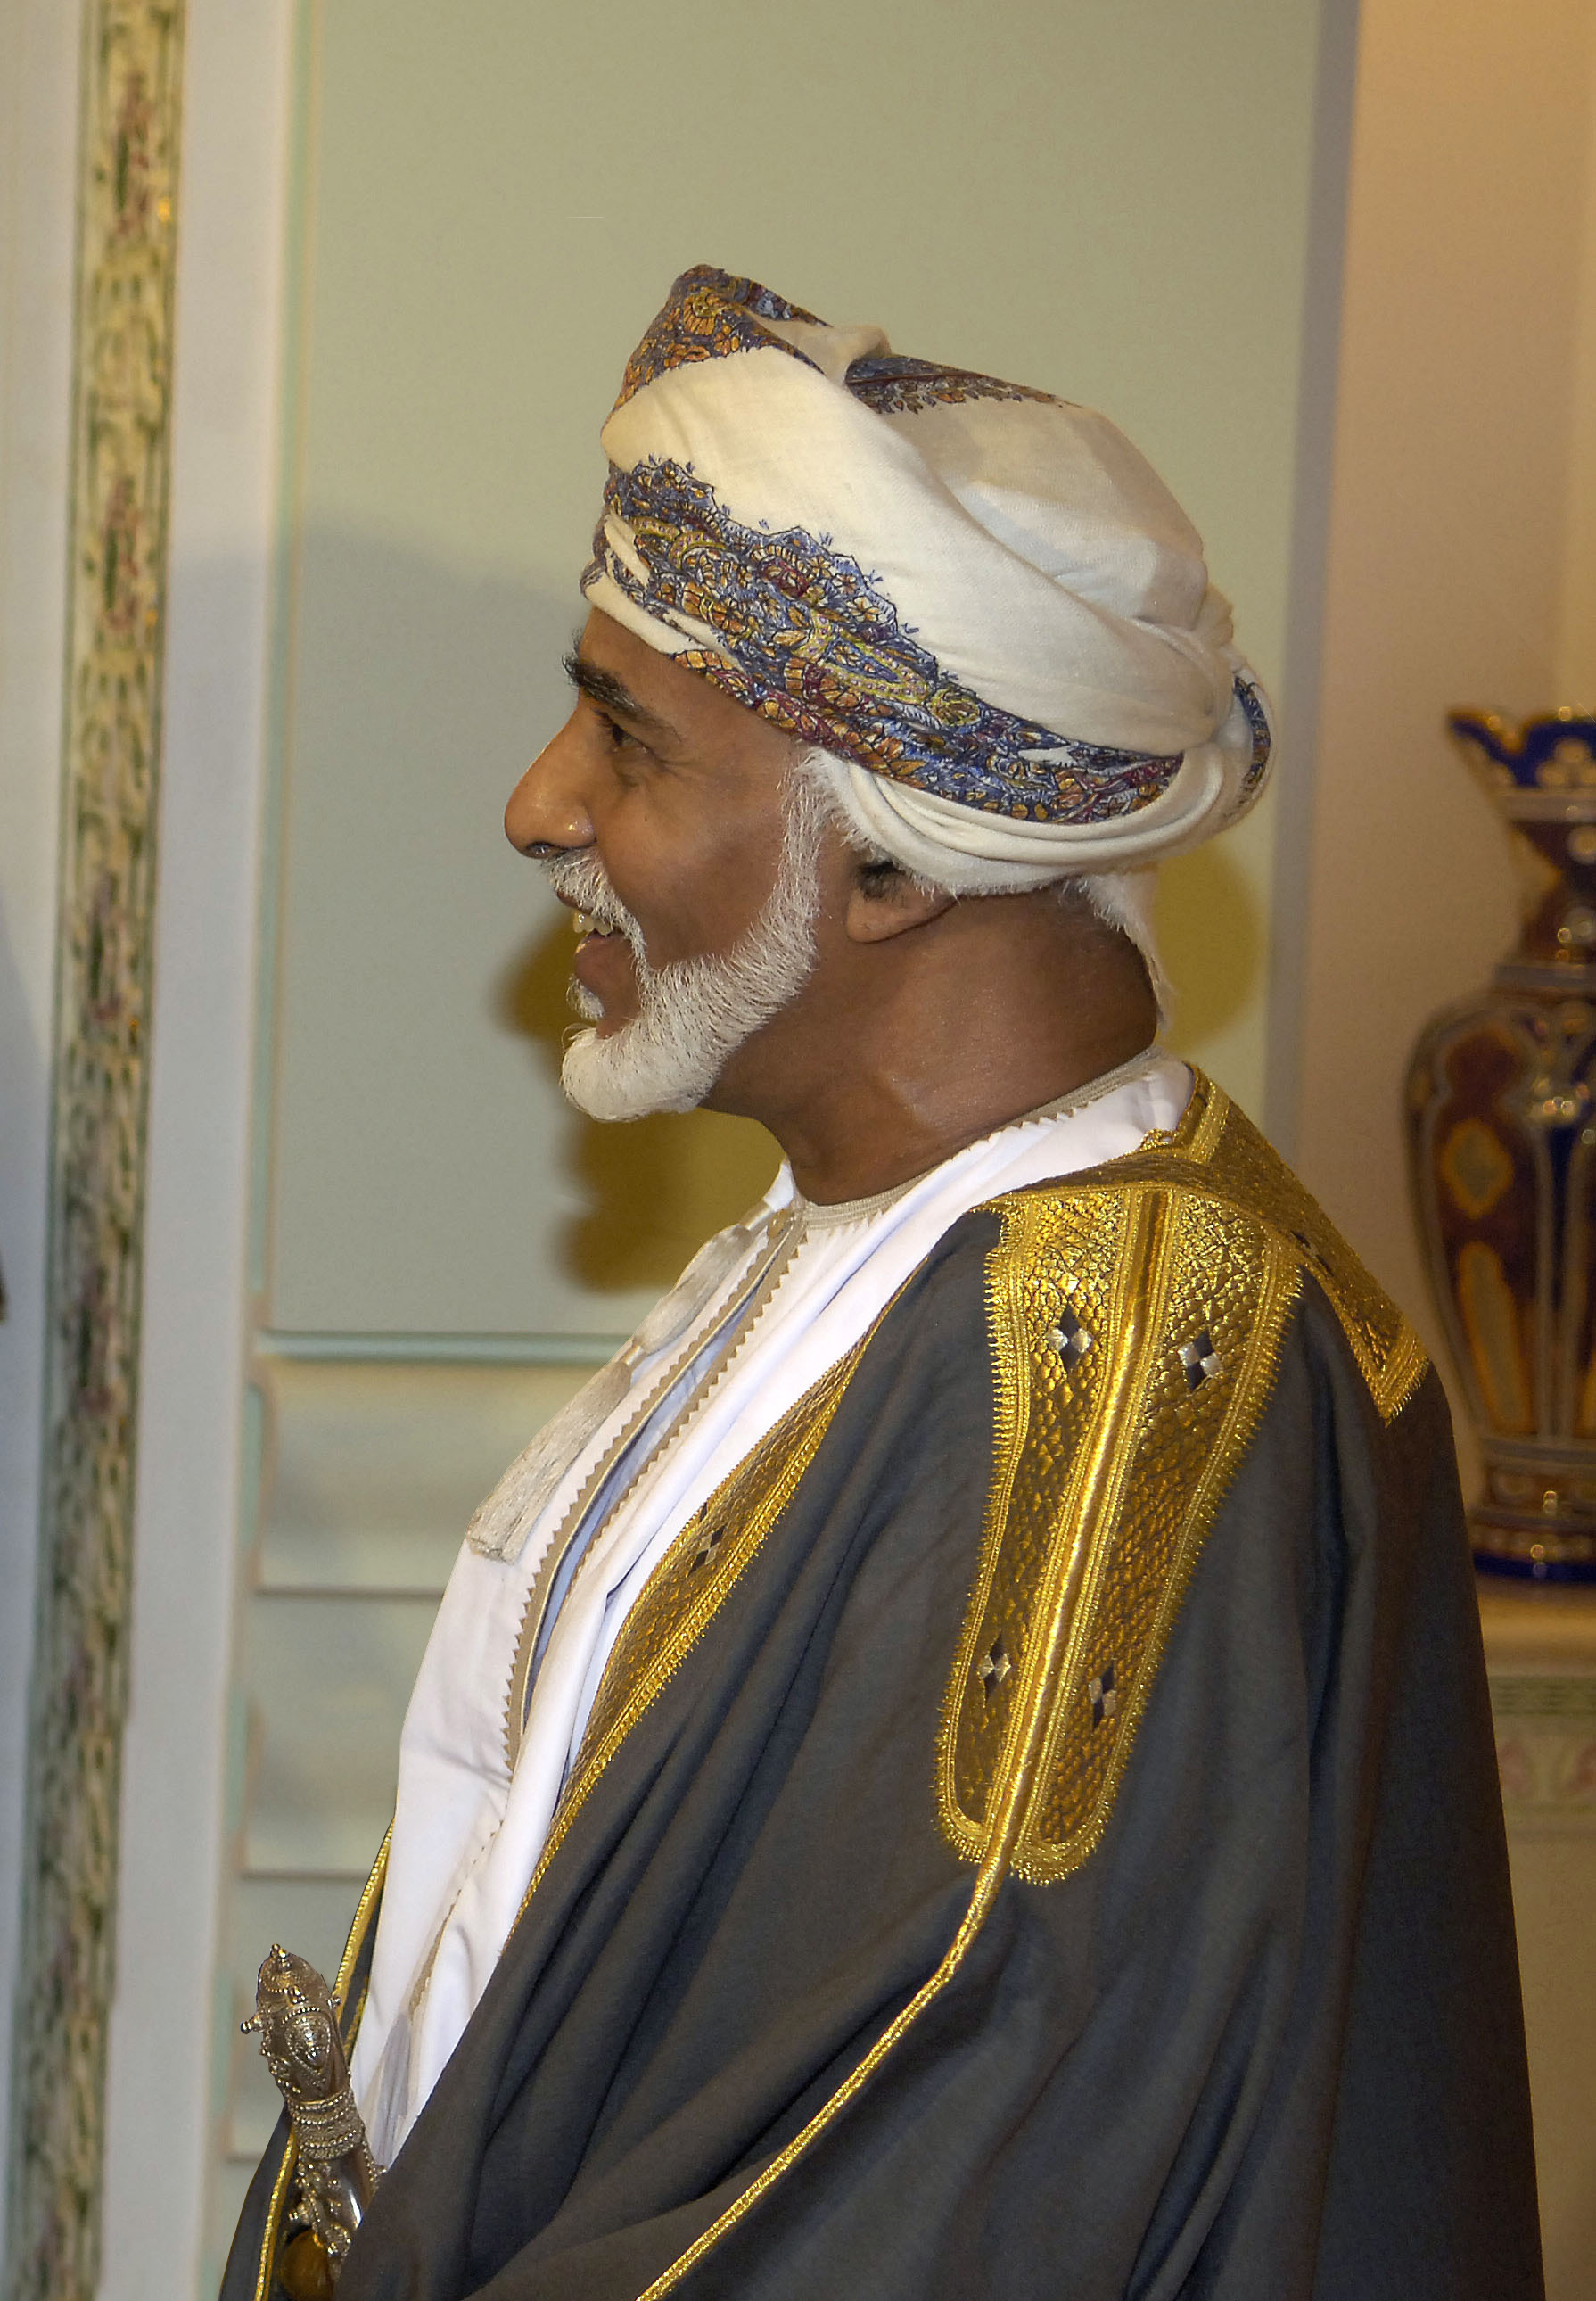 1940: Sultan who Still Holds Absolute Power in his Oman